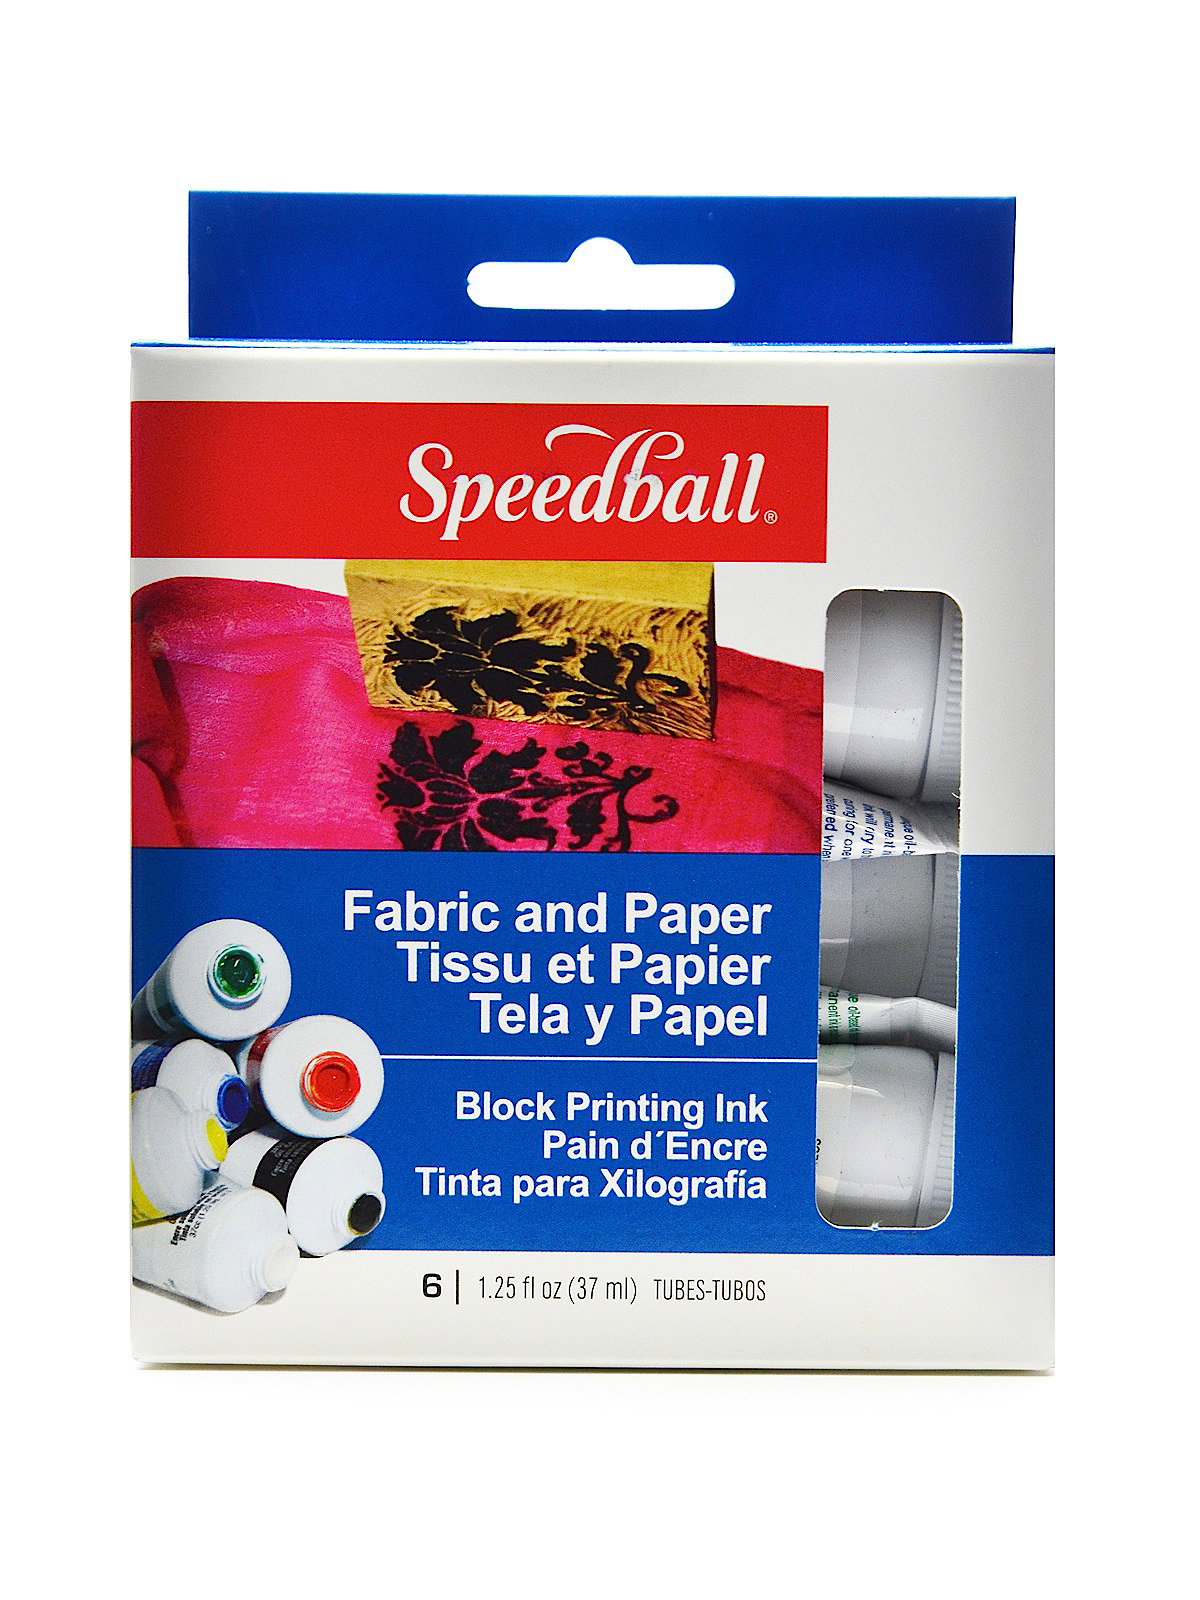 Ink for block printing on fabric